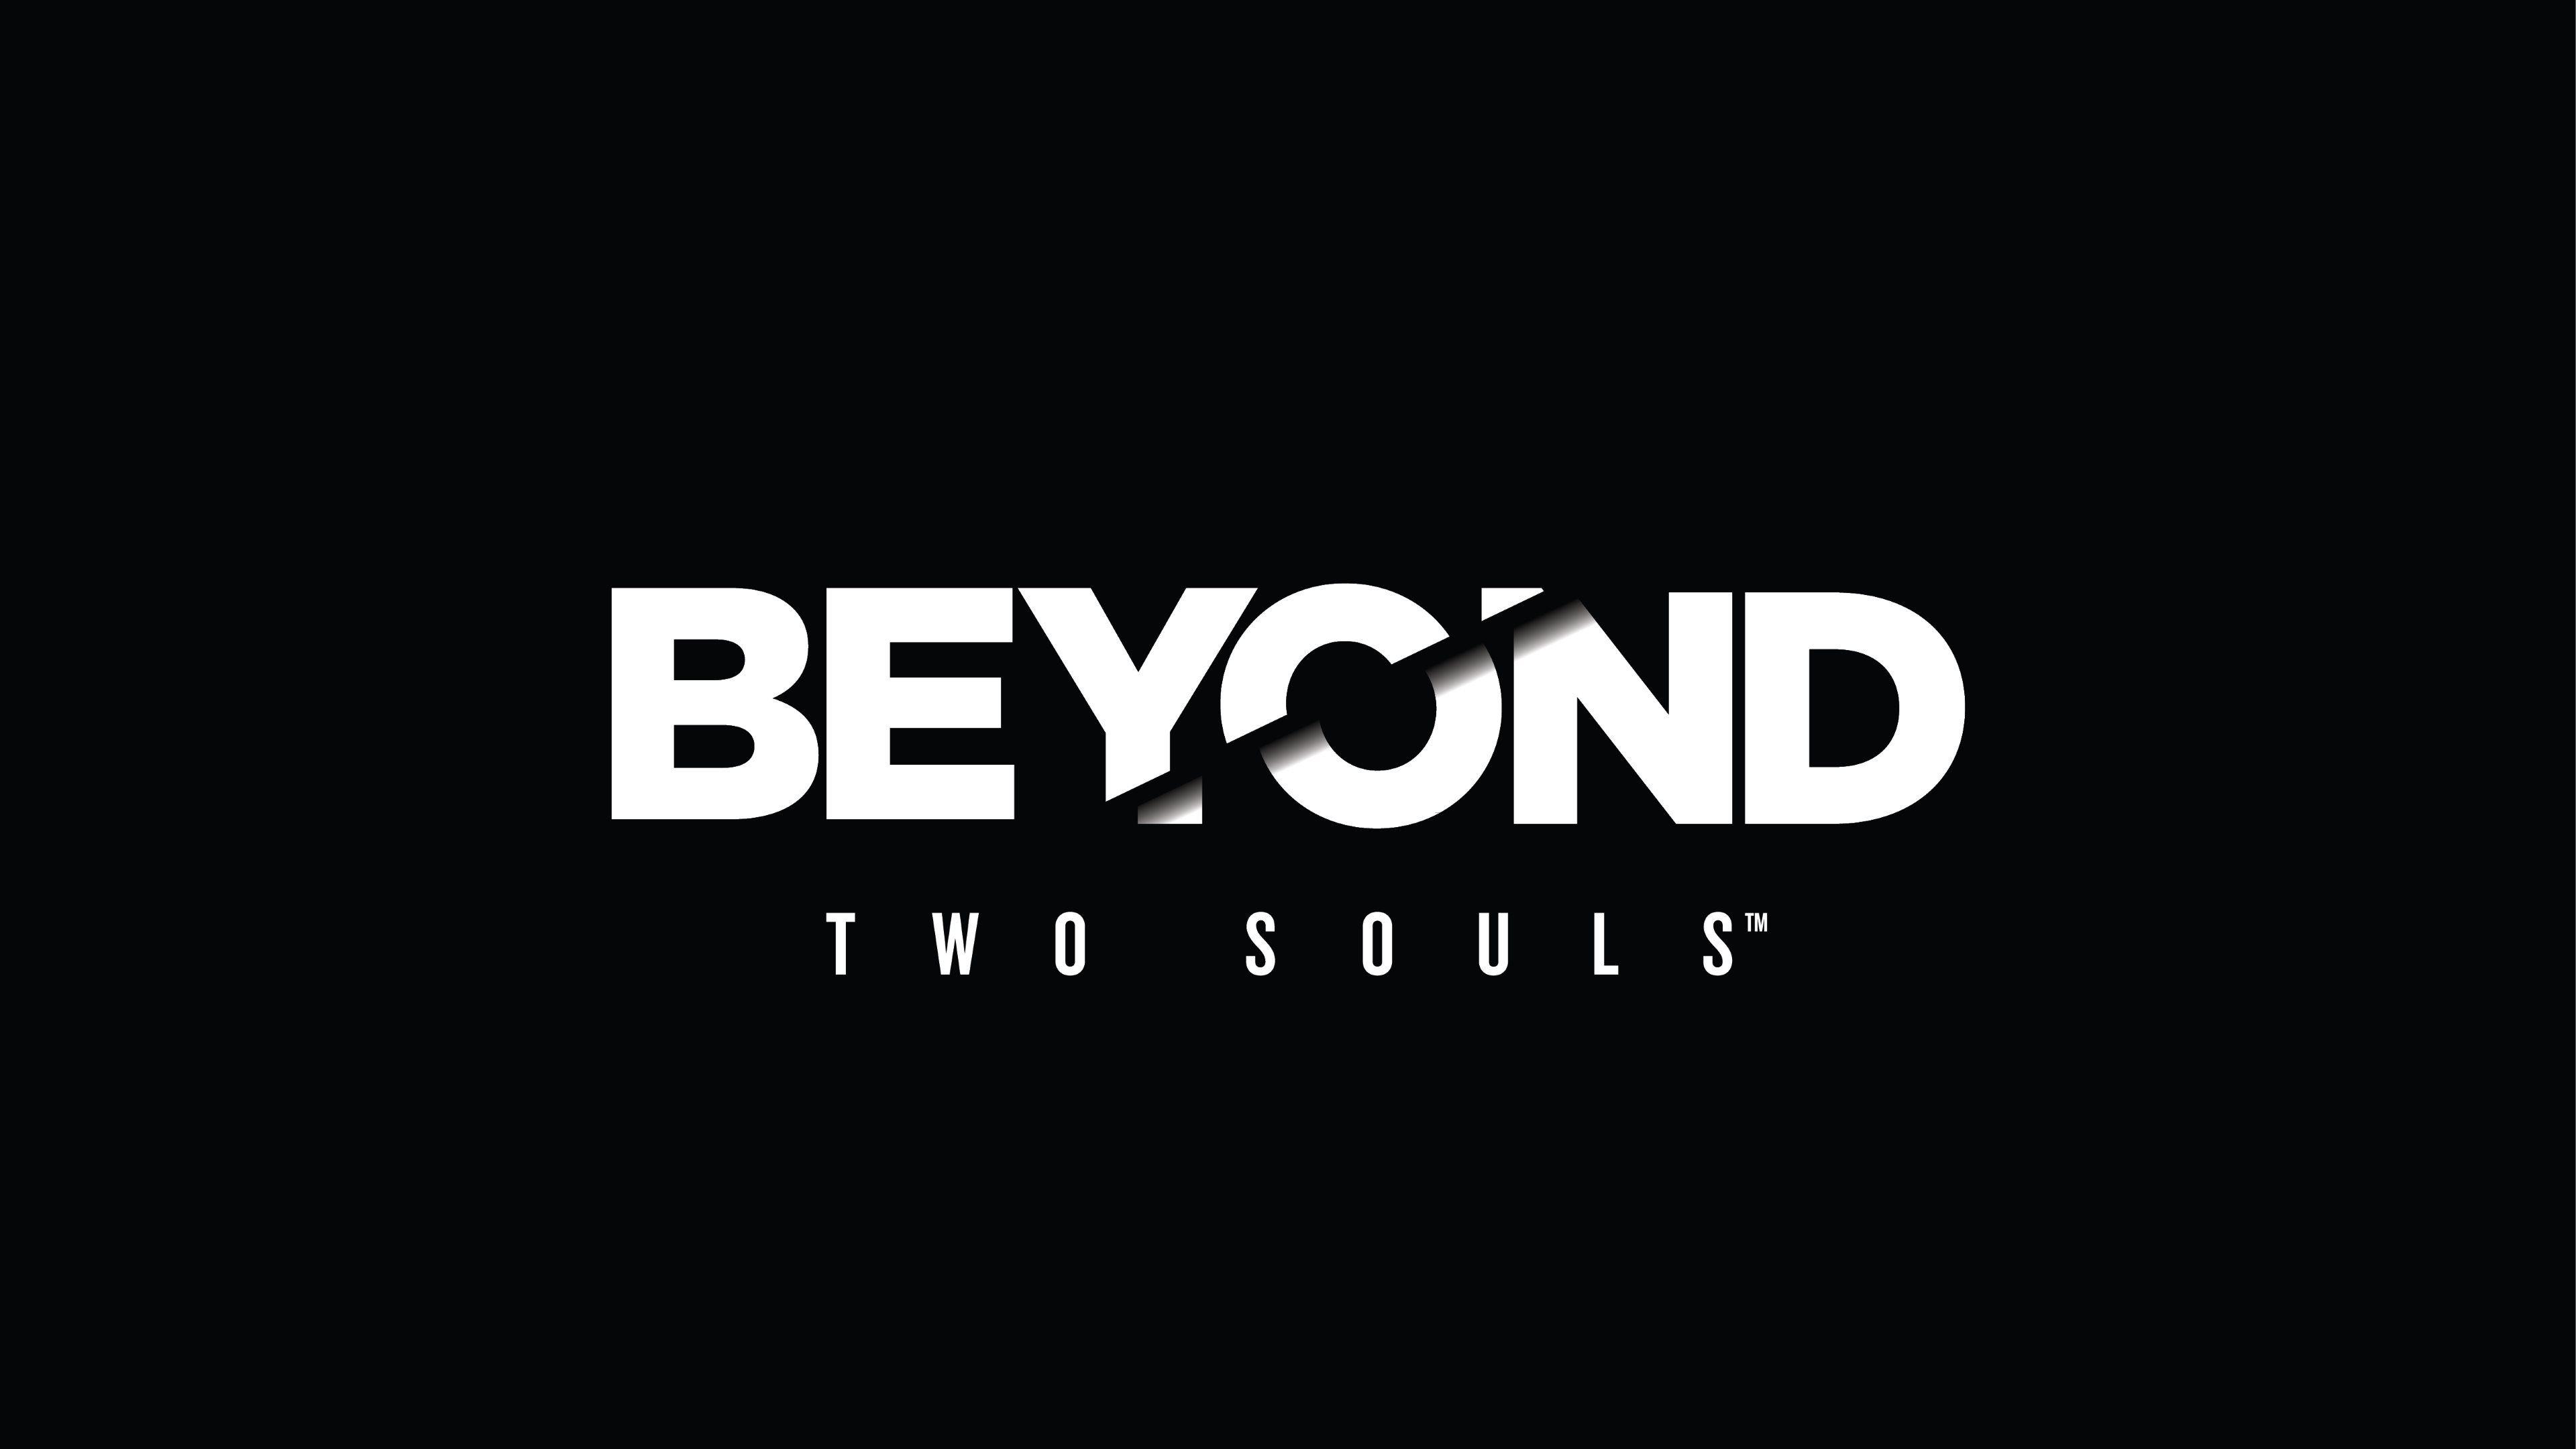 Beyond: Two Souls Wallpaper in HD, 4K and wide sizes